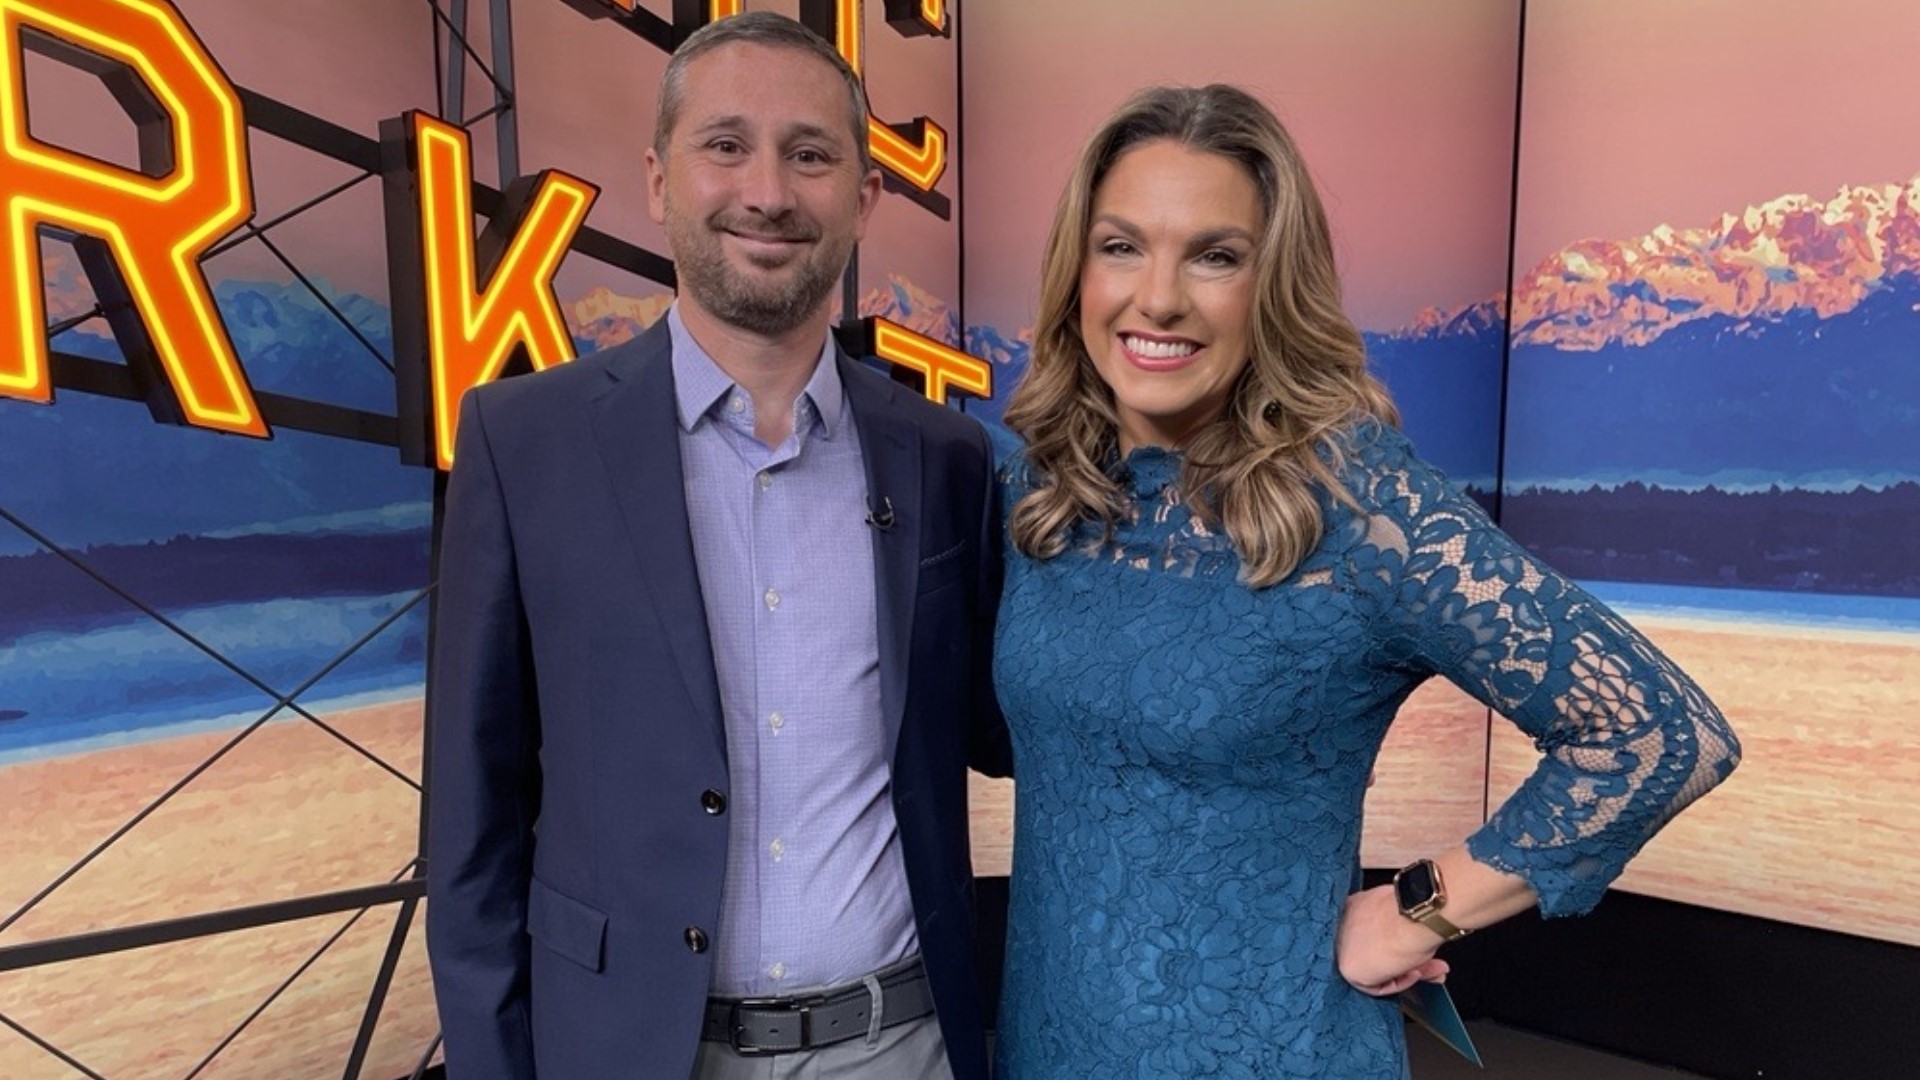 Eric Britt joined New Day to share insight into what to do if you think you or a loved one needs help with addiction. Sponsored by EvergreenHealth.